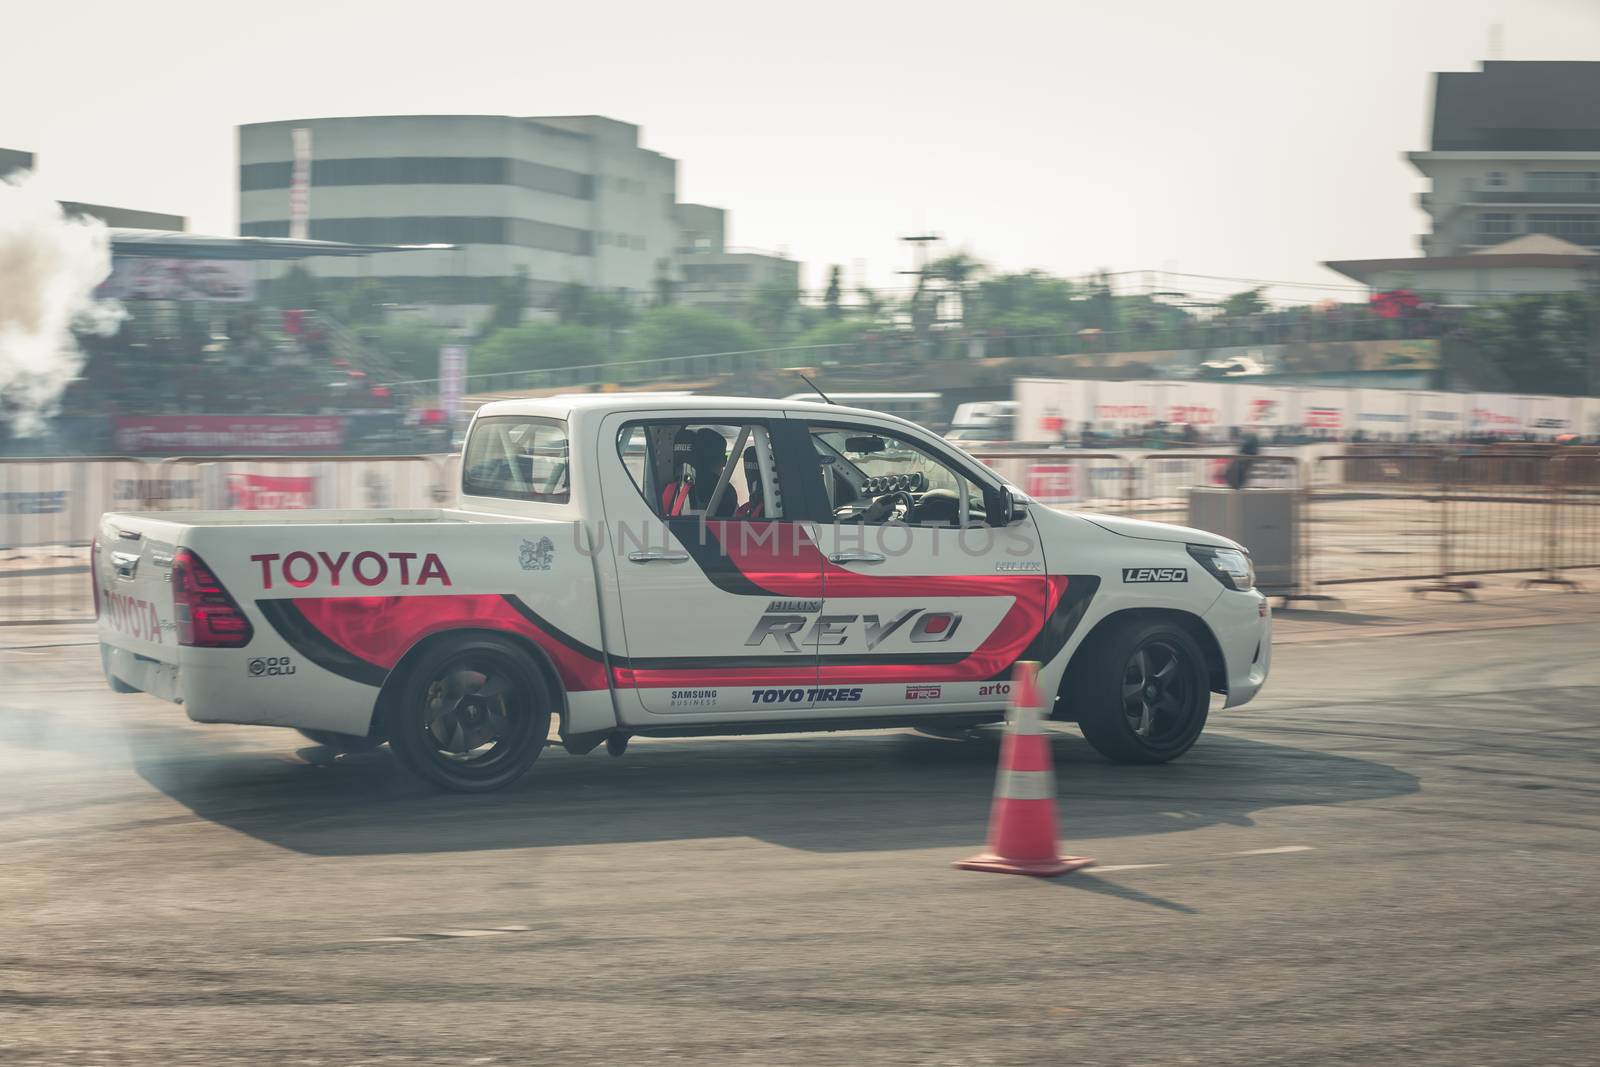 Pick-up car perform drifting on the track with motion blur by aotweerawit